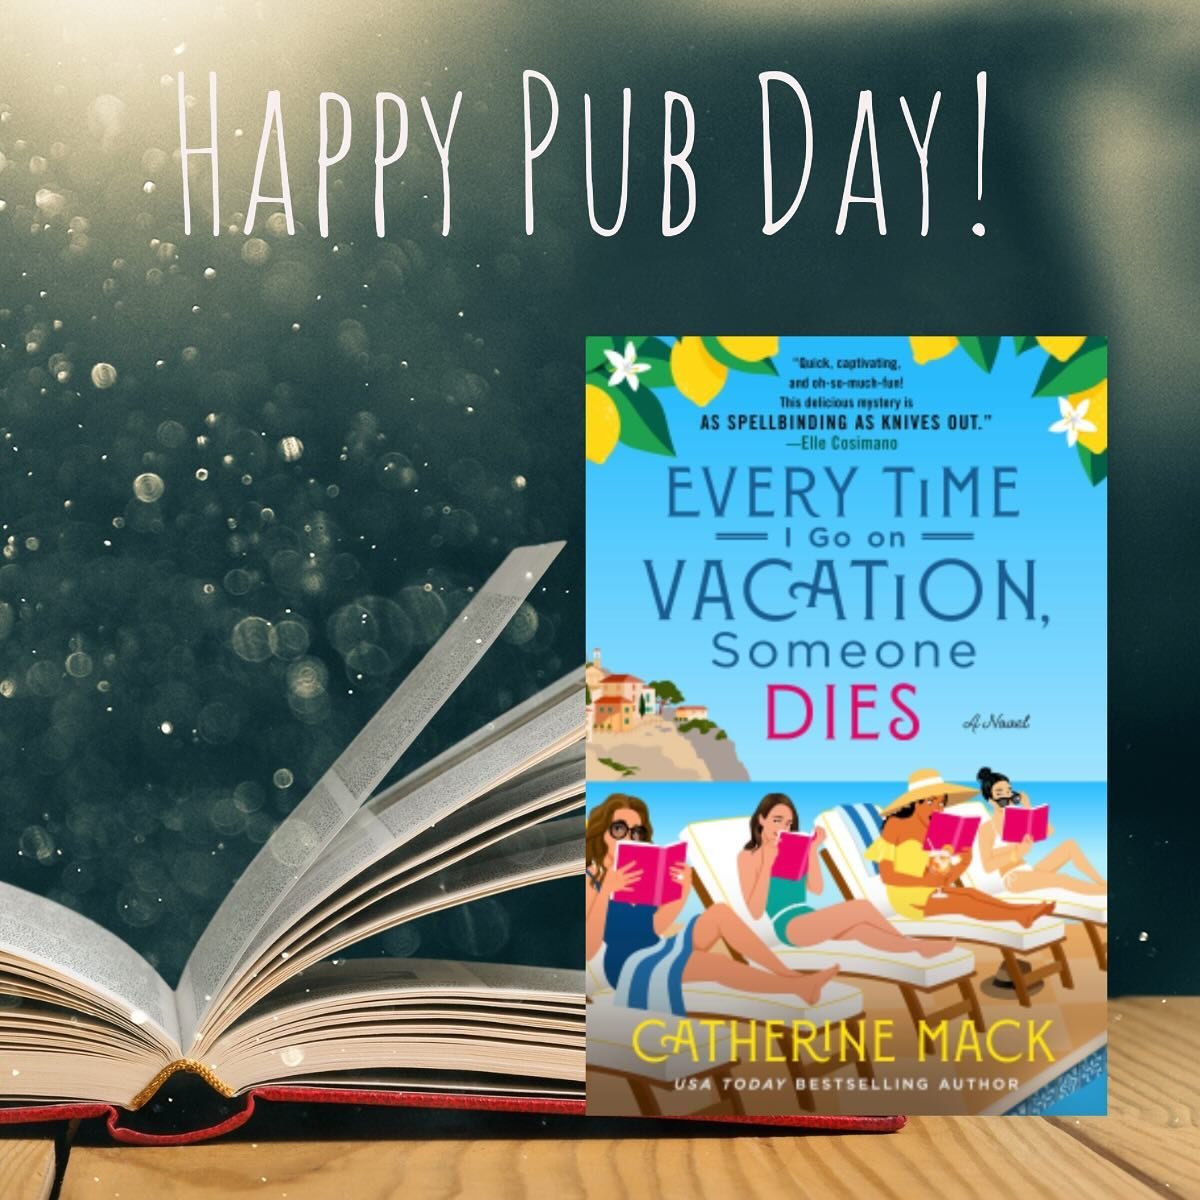 🍾 Happy Pub Day 🍾 @catherinemckenzieauthor 😍😍
Cattie did a shoutout to this fun book on the latest episode! Not only should you add this to your TBR, check out our show whenever you listen to your bookish podcasts! @cattie_naj @oakylovesbooksandt